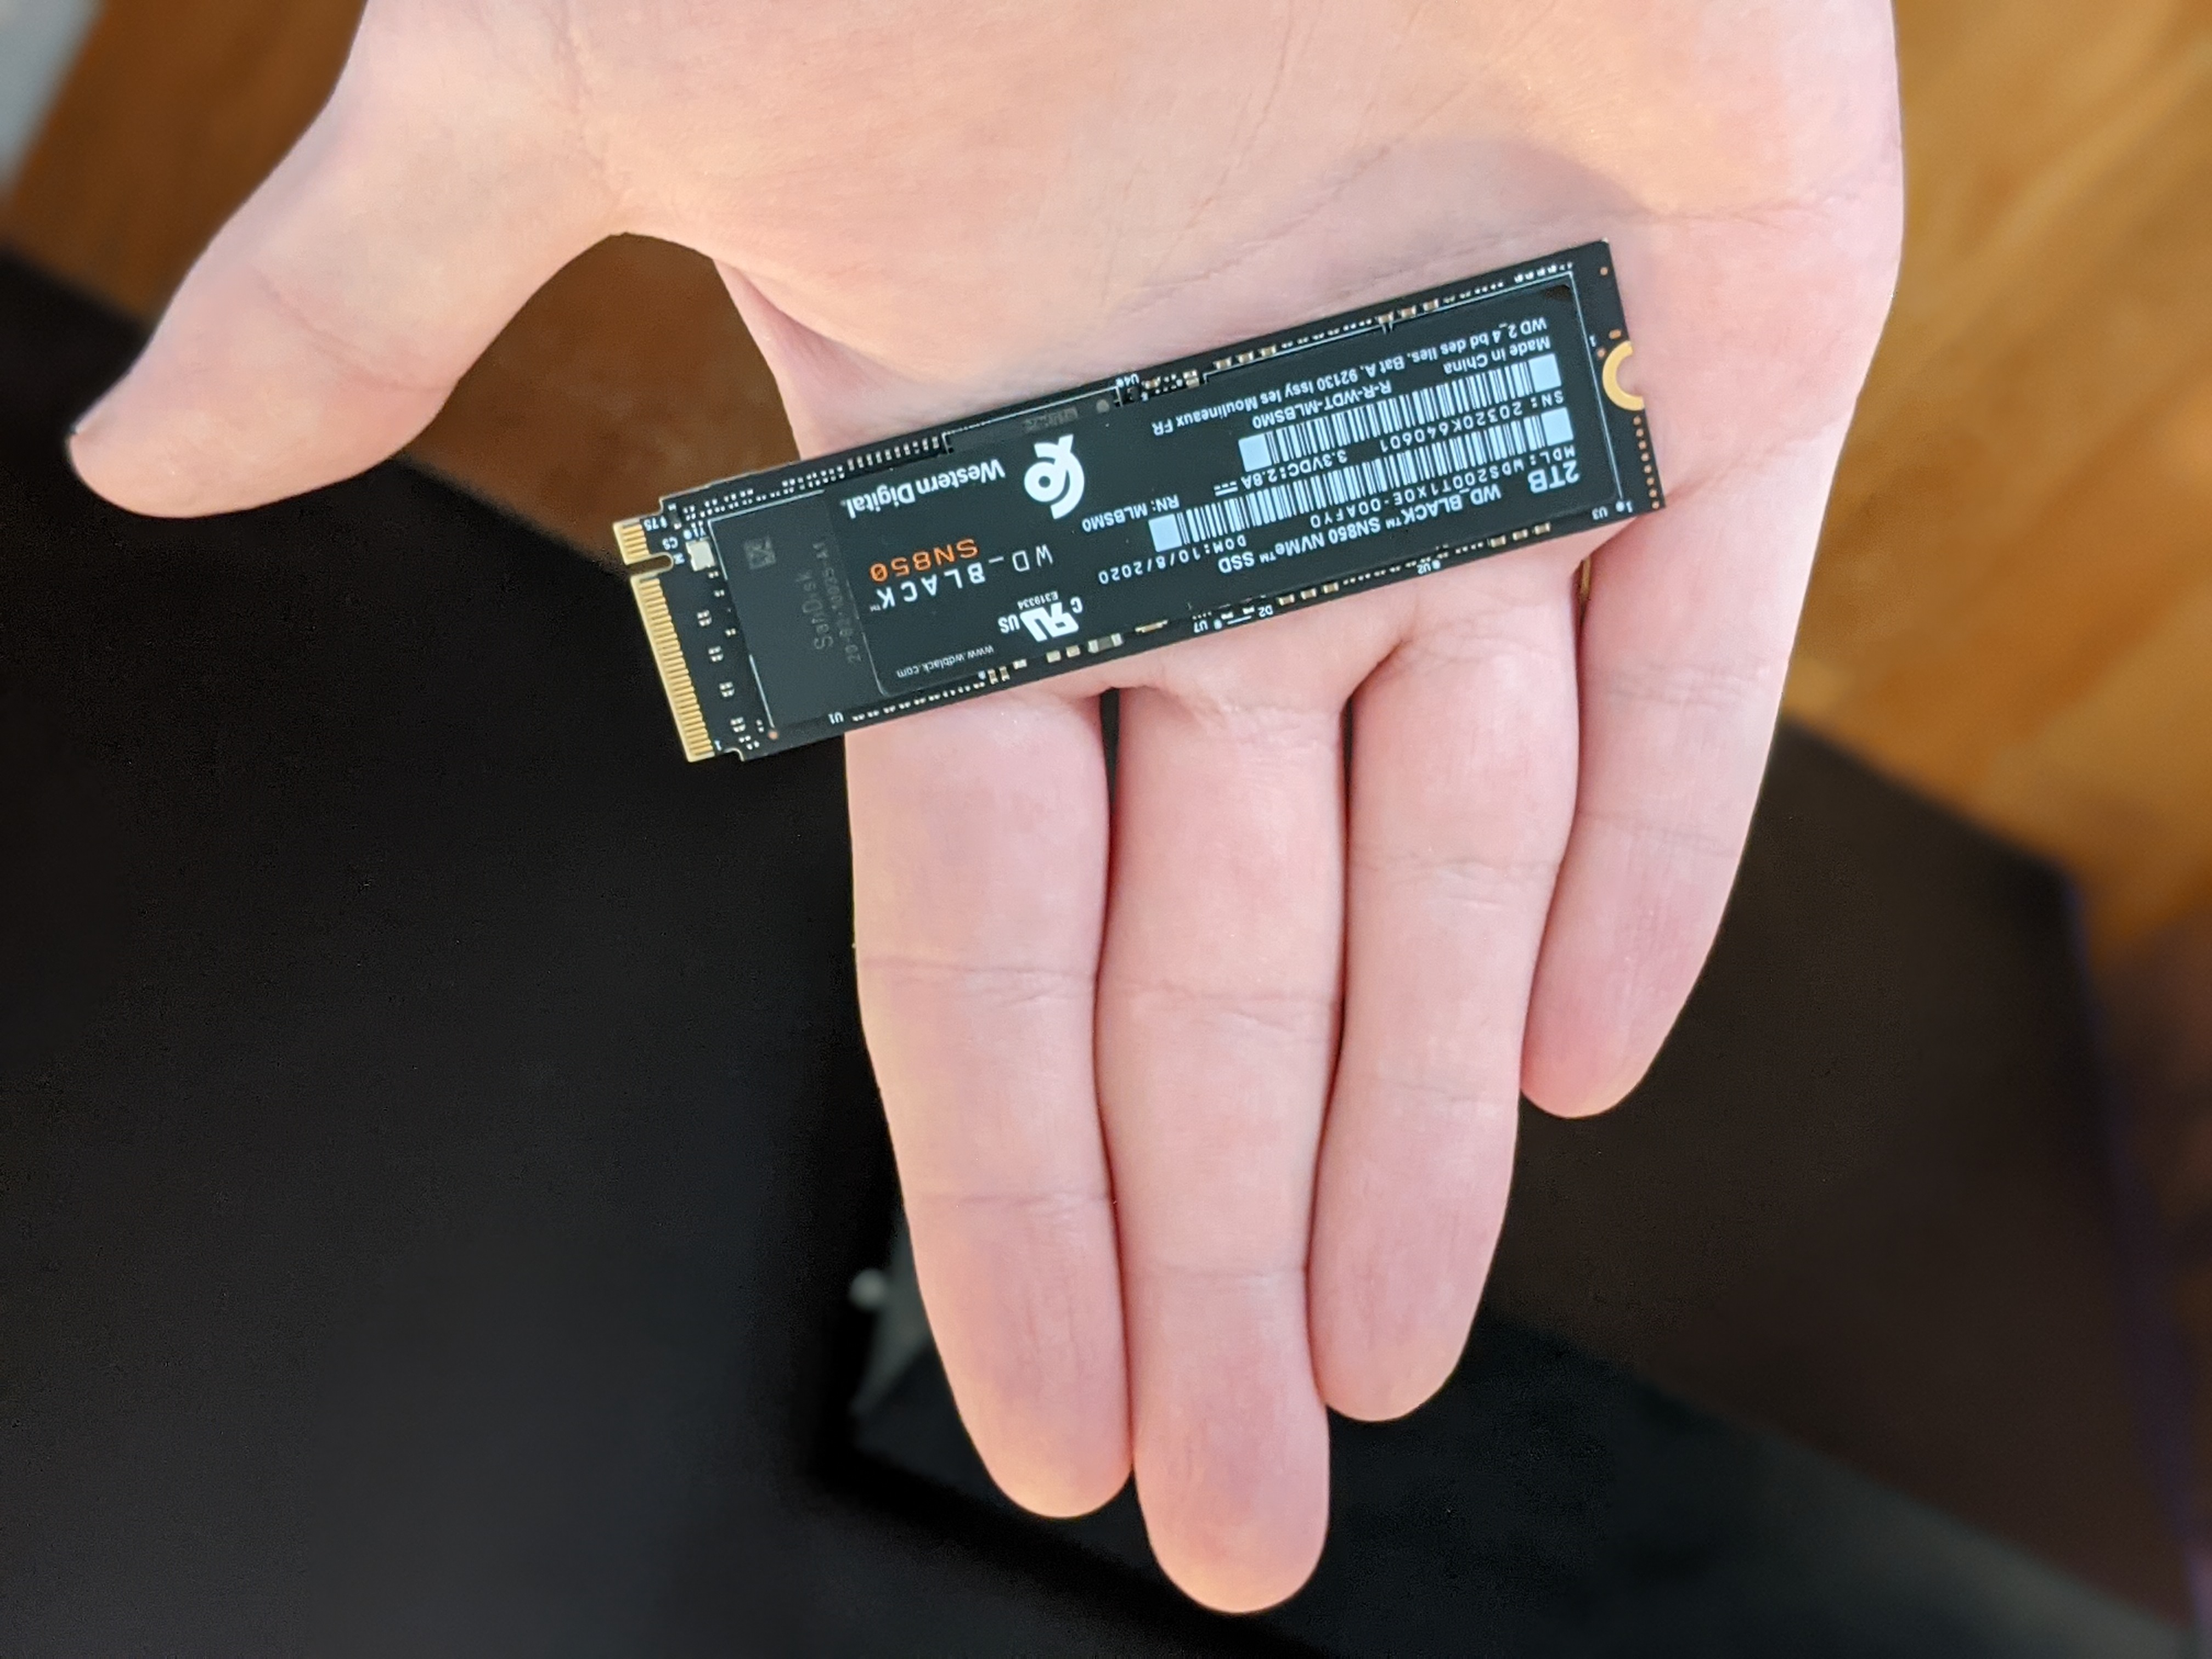 How to an M.2 SSD | Tom's Guide